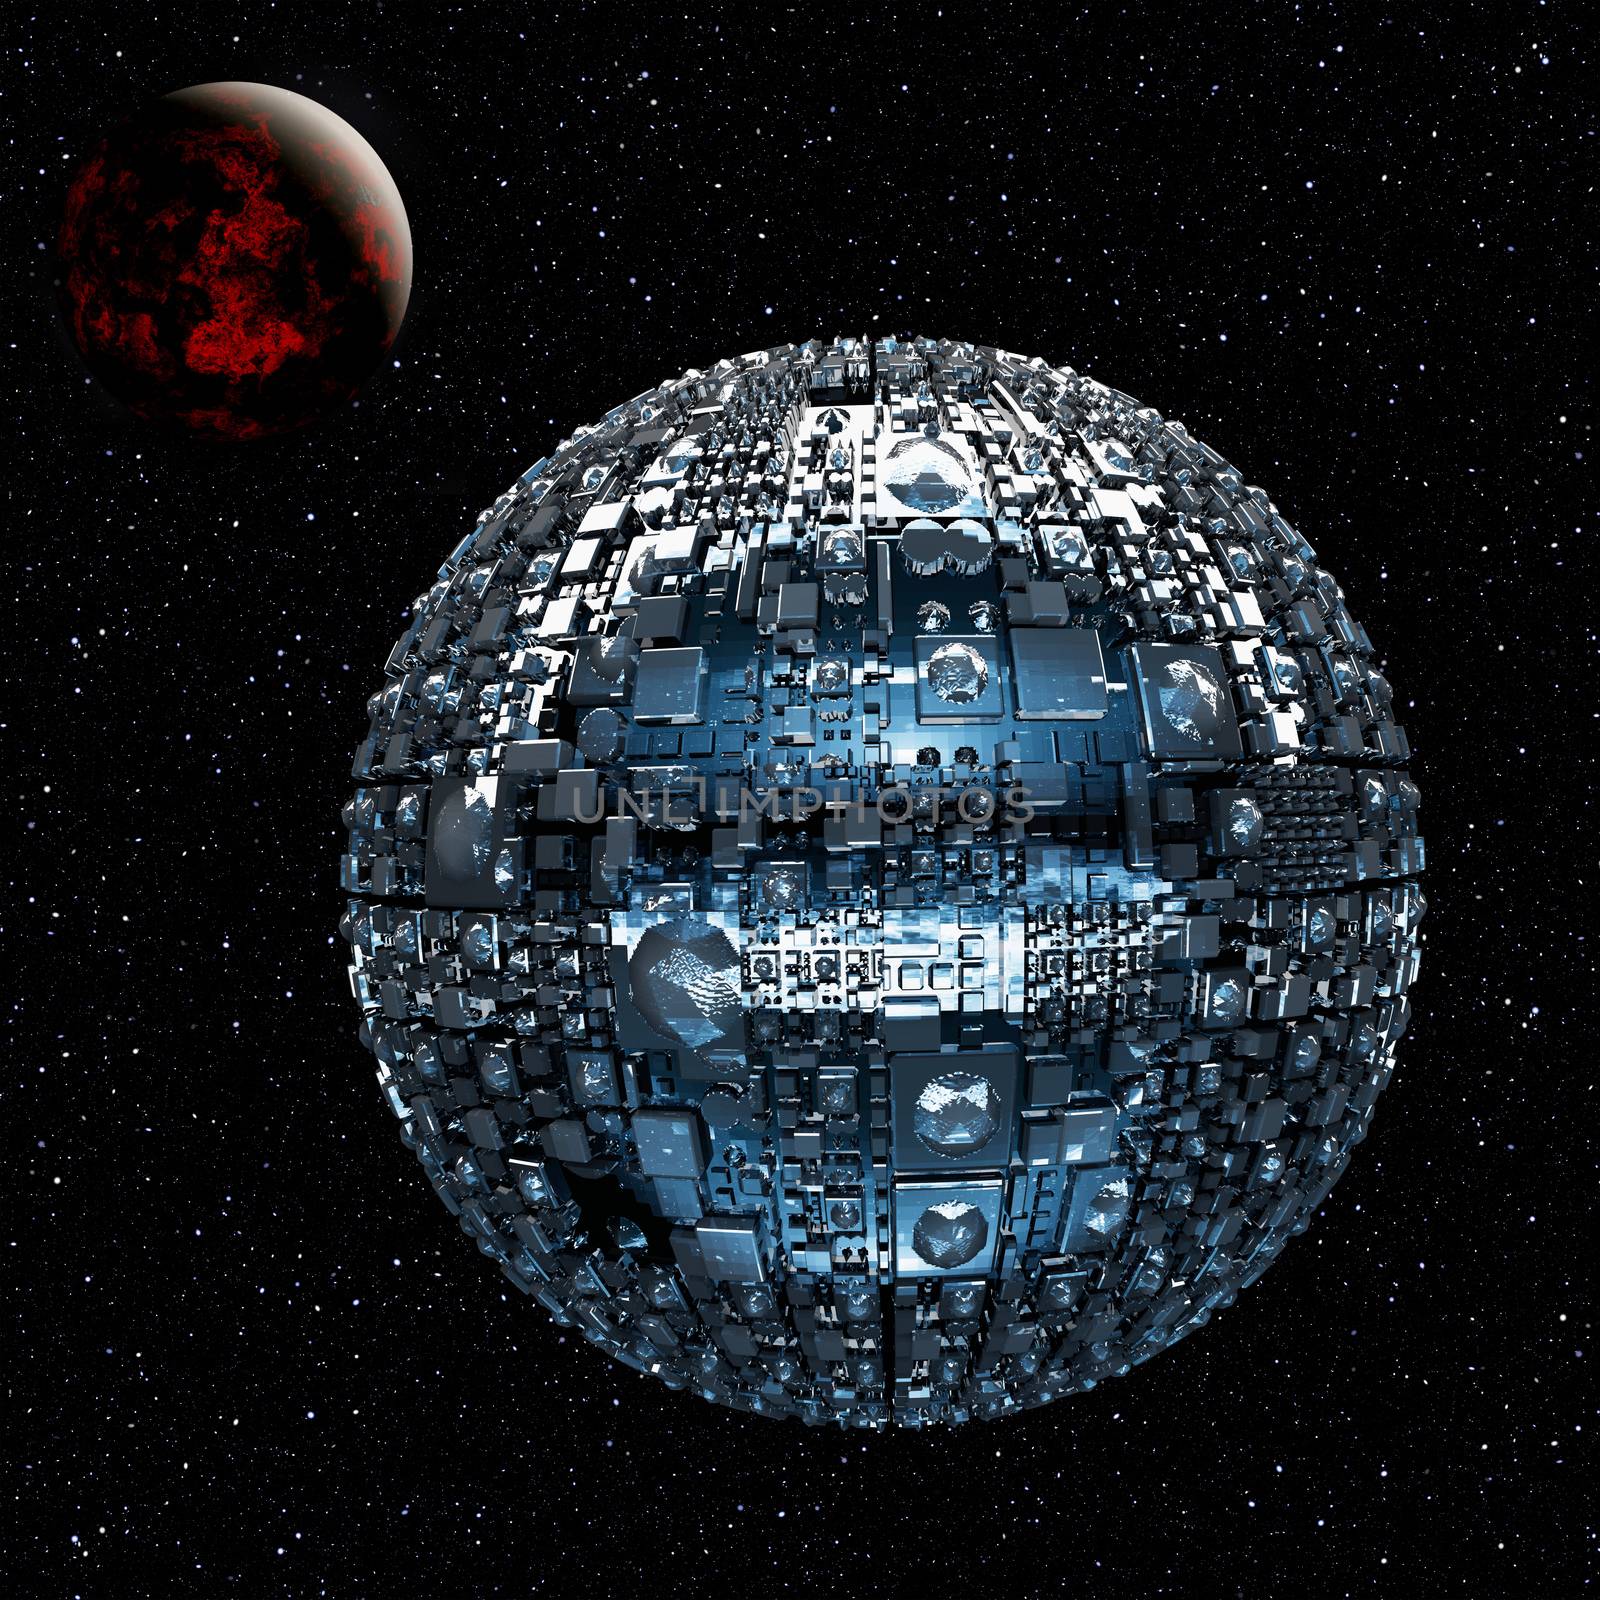 Fictional universe with space battle ship by w20er